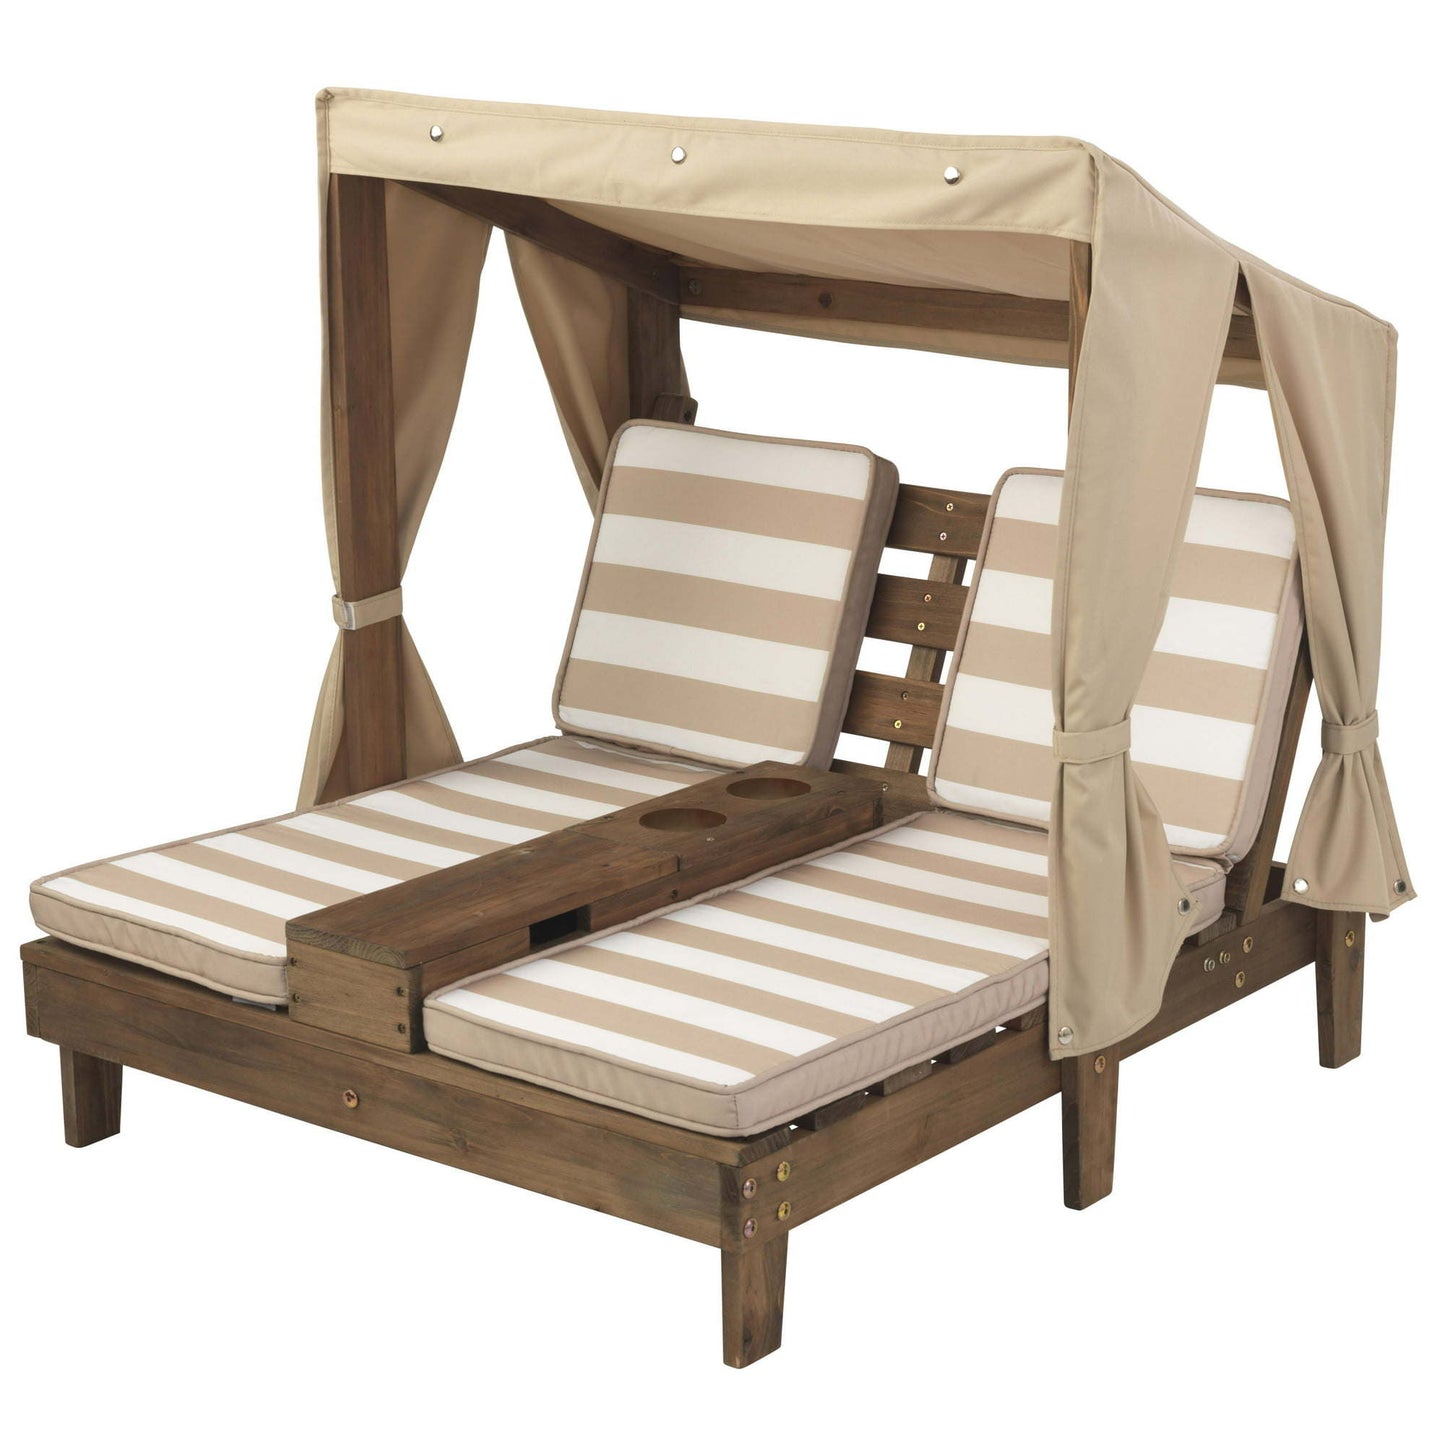 Wooden Outdoor Double Chaise Lounge With Cup Holders (For Kids)